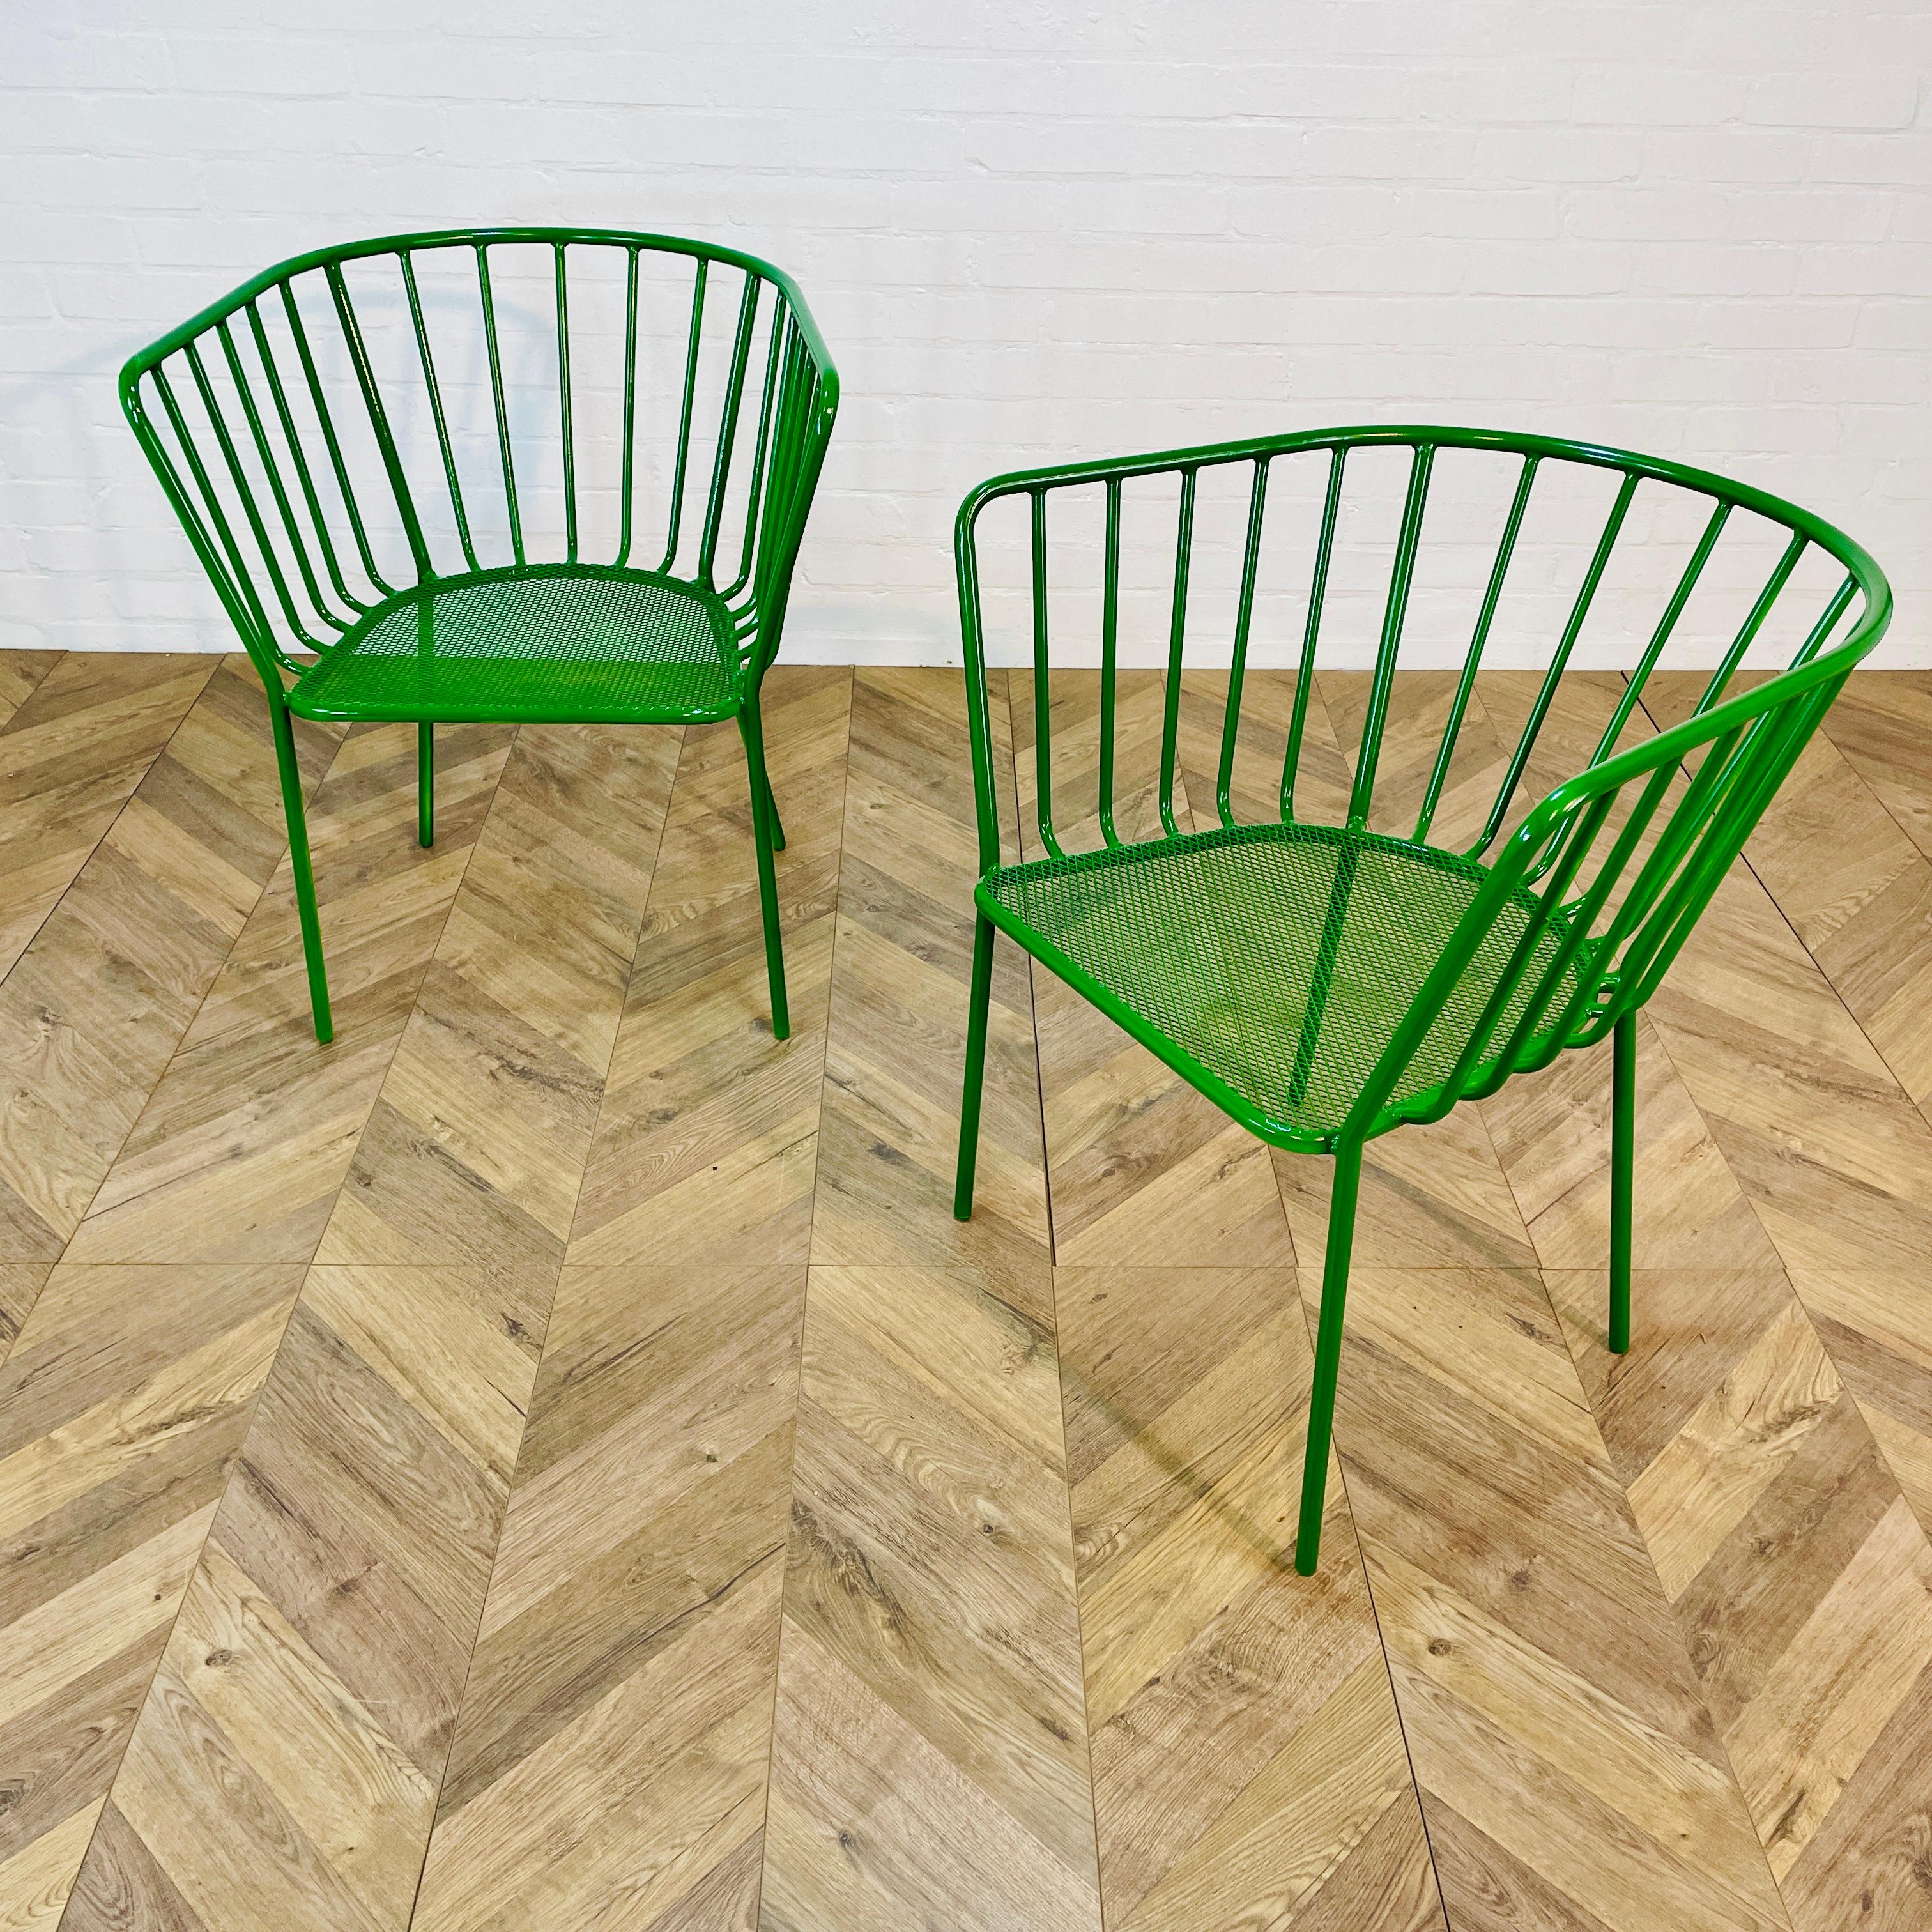 Late 20th Century Vintage Italian Green Metal Chairs, Set of 2, 1970s